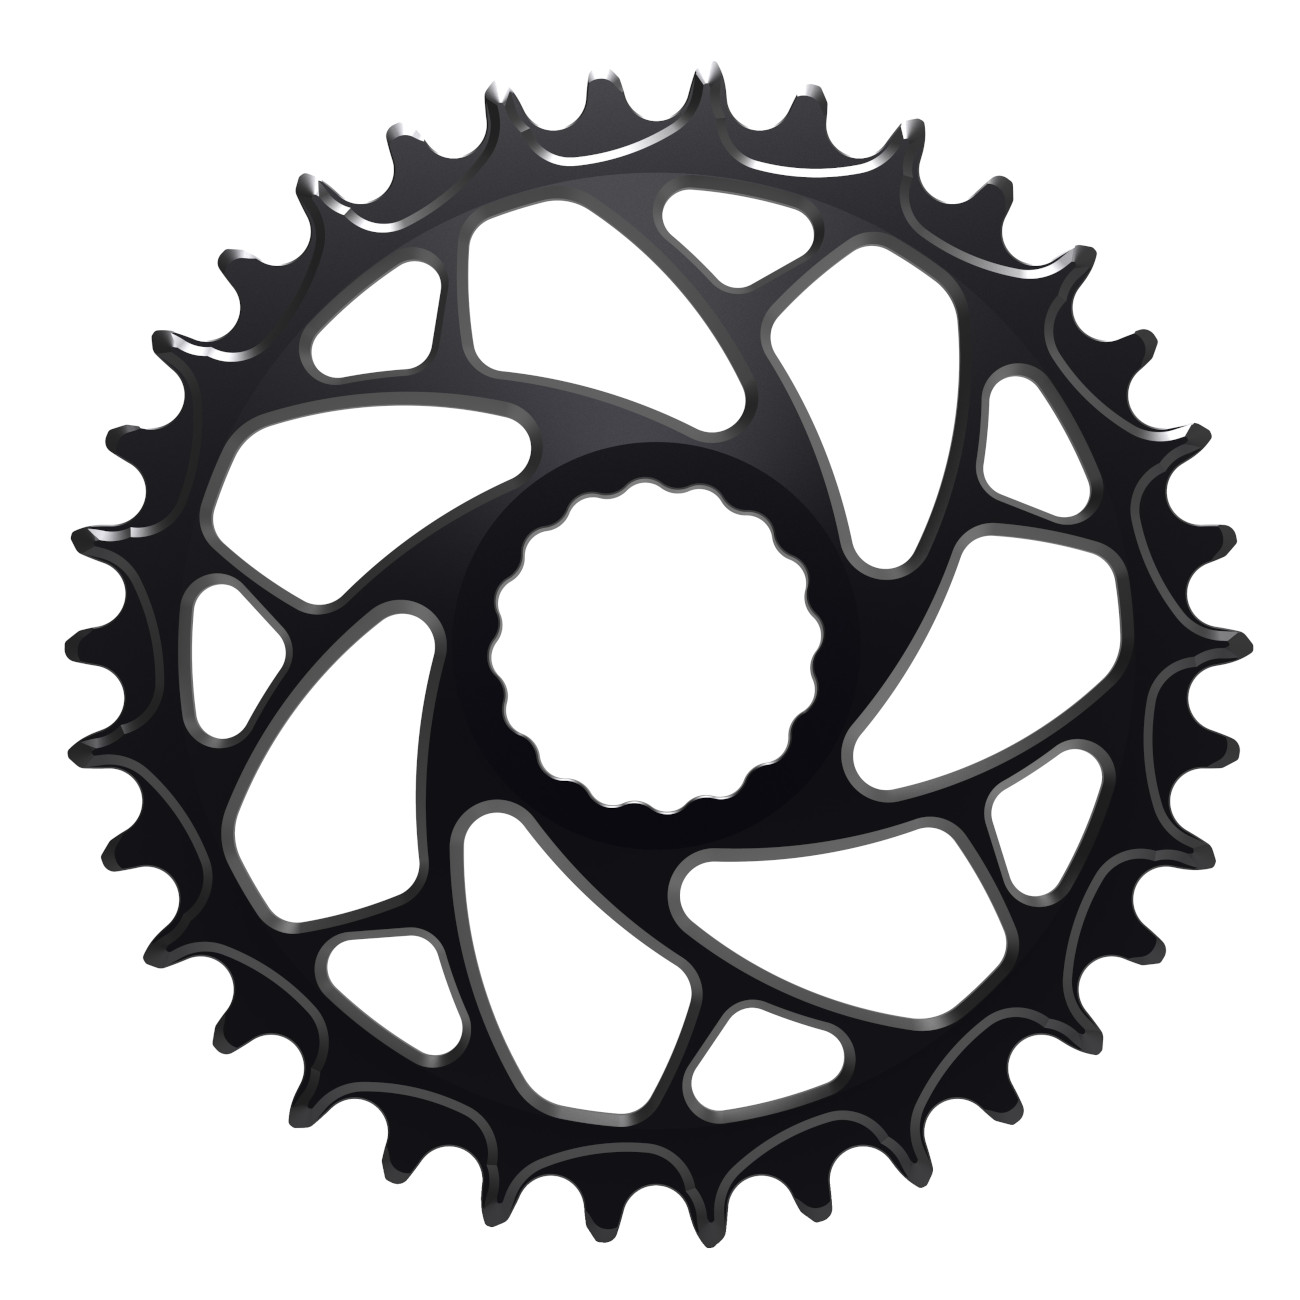 Productfoto van Alugear ELM Narrow Wide Boost Chainring - for Race Face Cinch Direct Mount